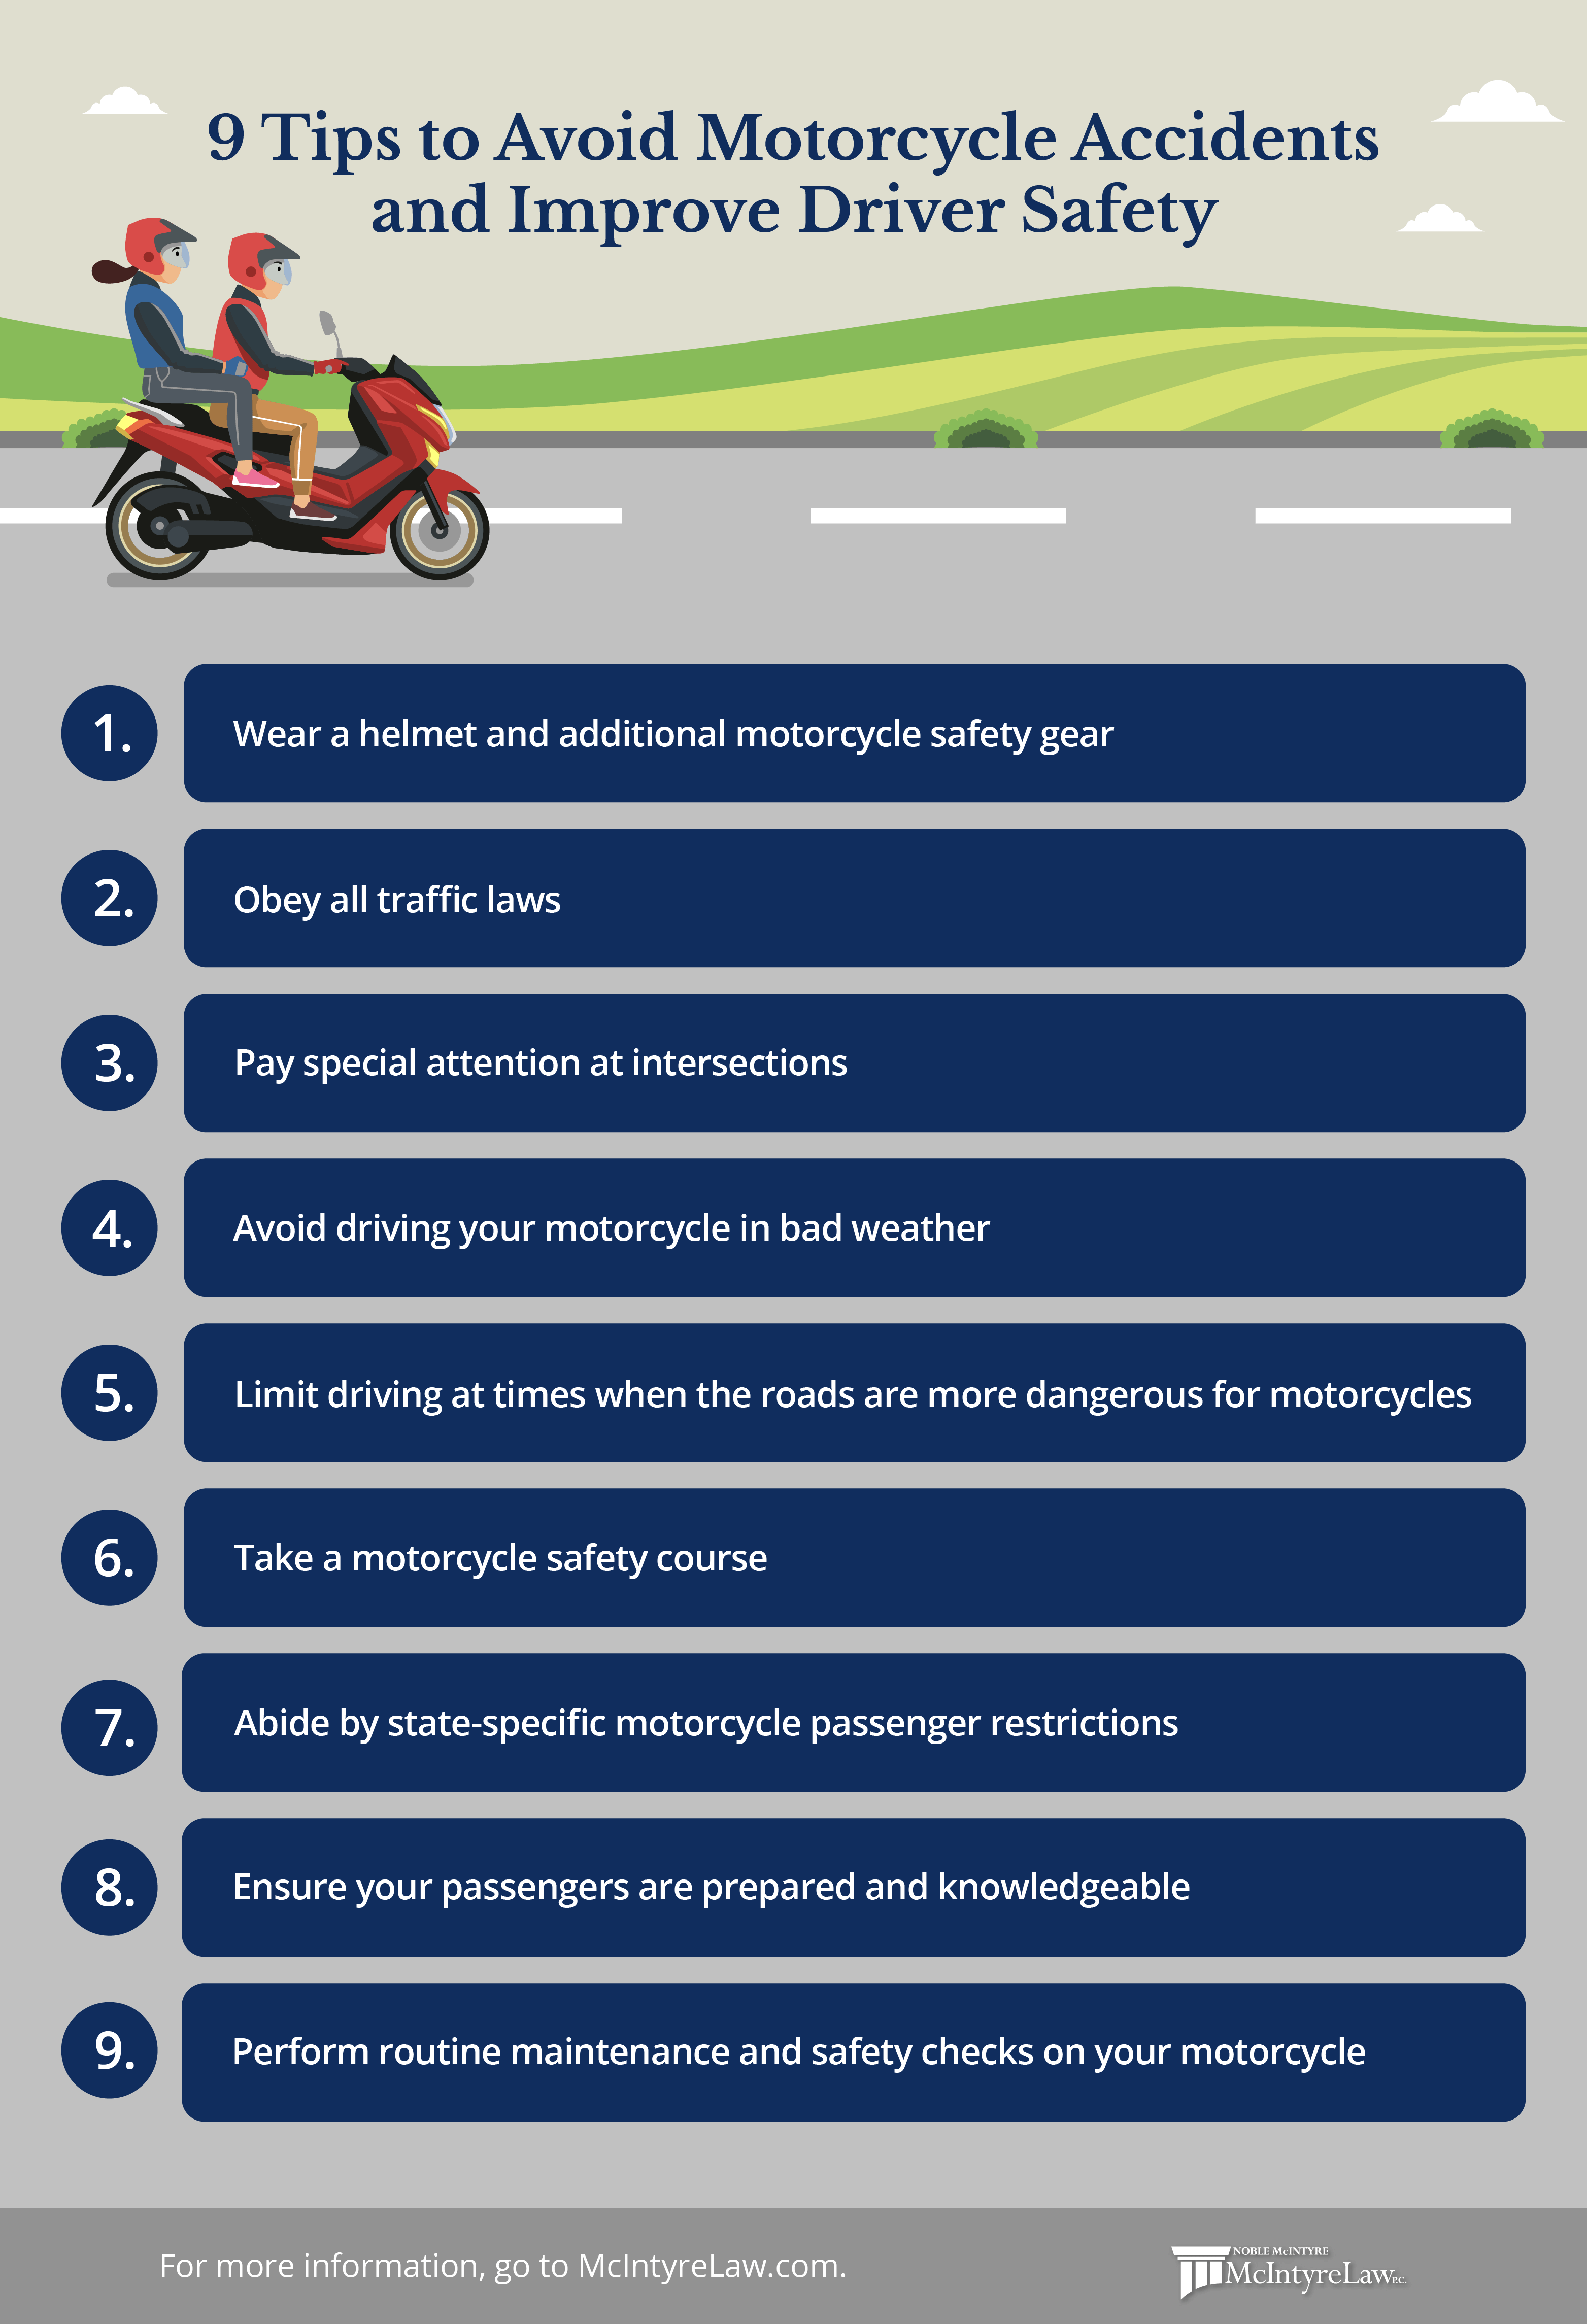 Tips to avoid motorcycle accidents and improve driver safety.